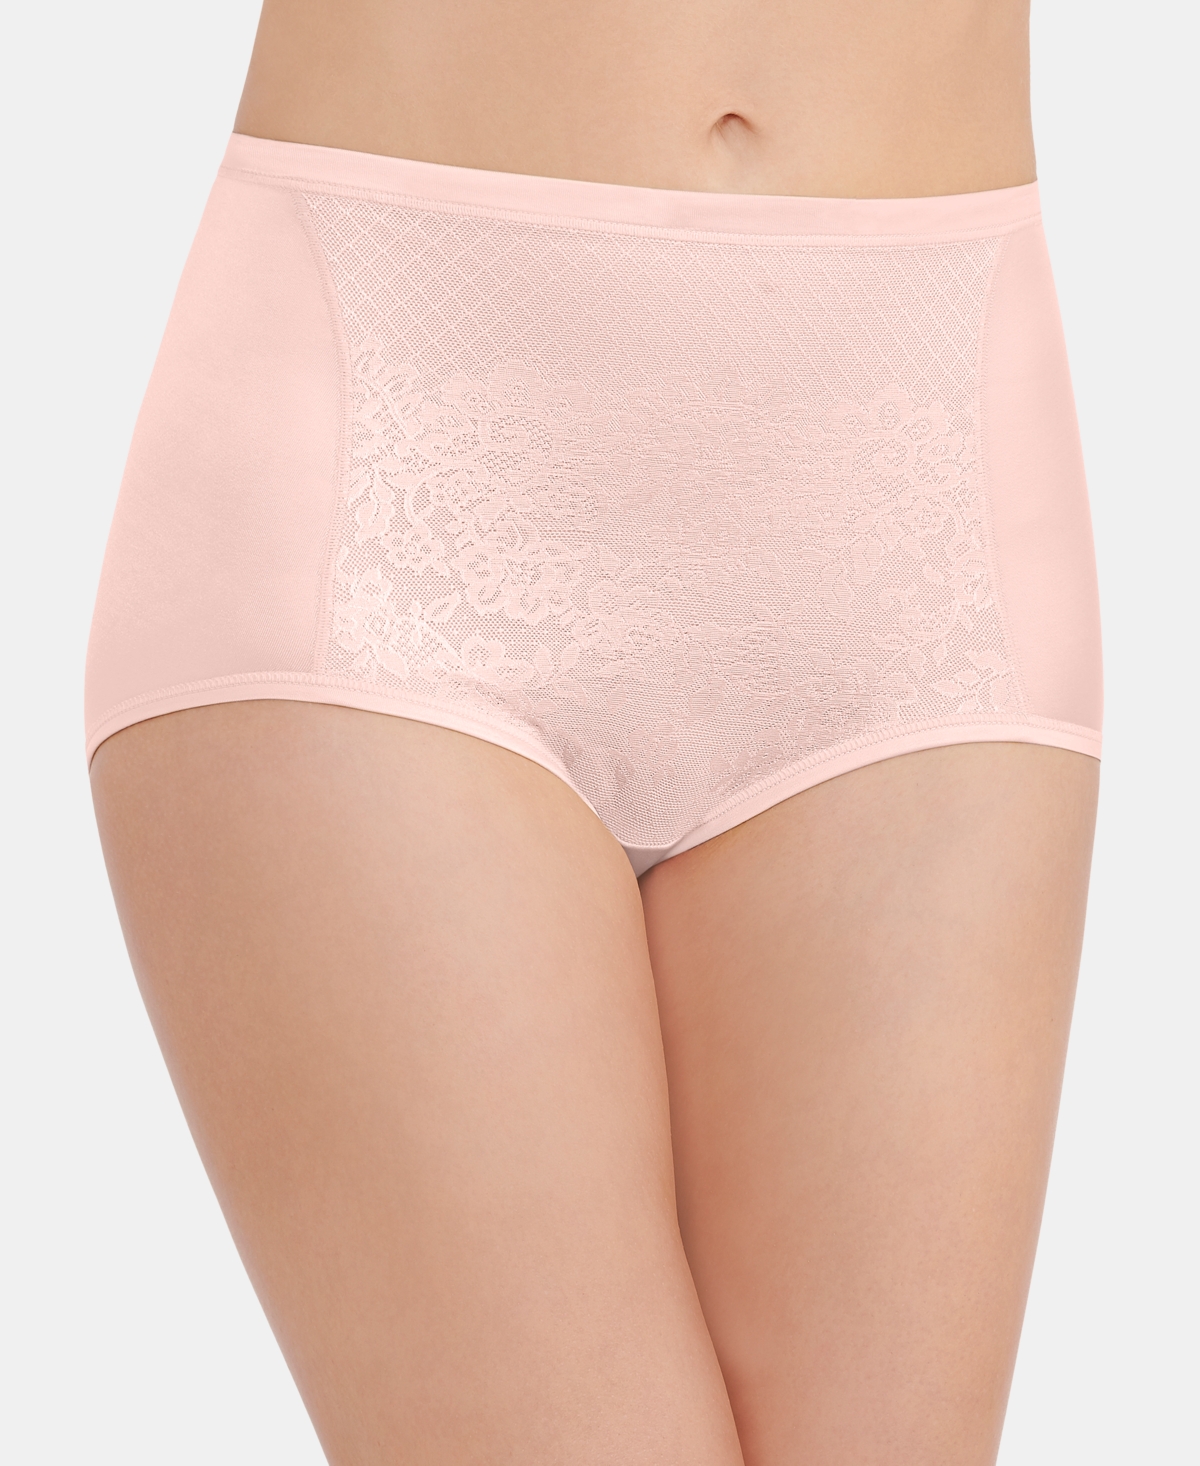 Women's Smoothing Comfort with Lace Brief Underwear - Champagne (Nude )